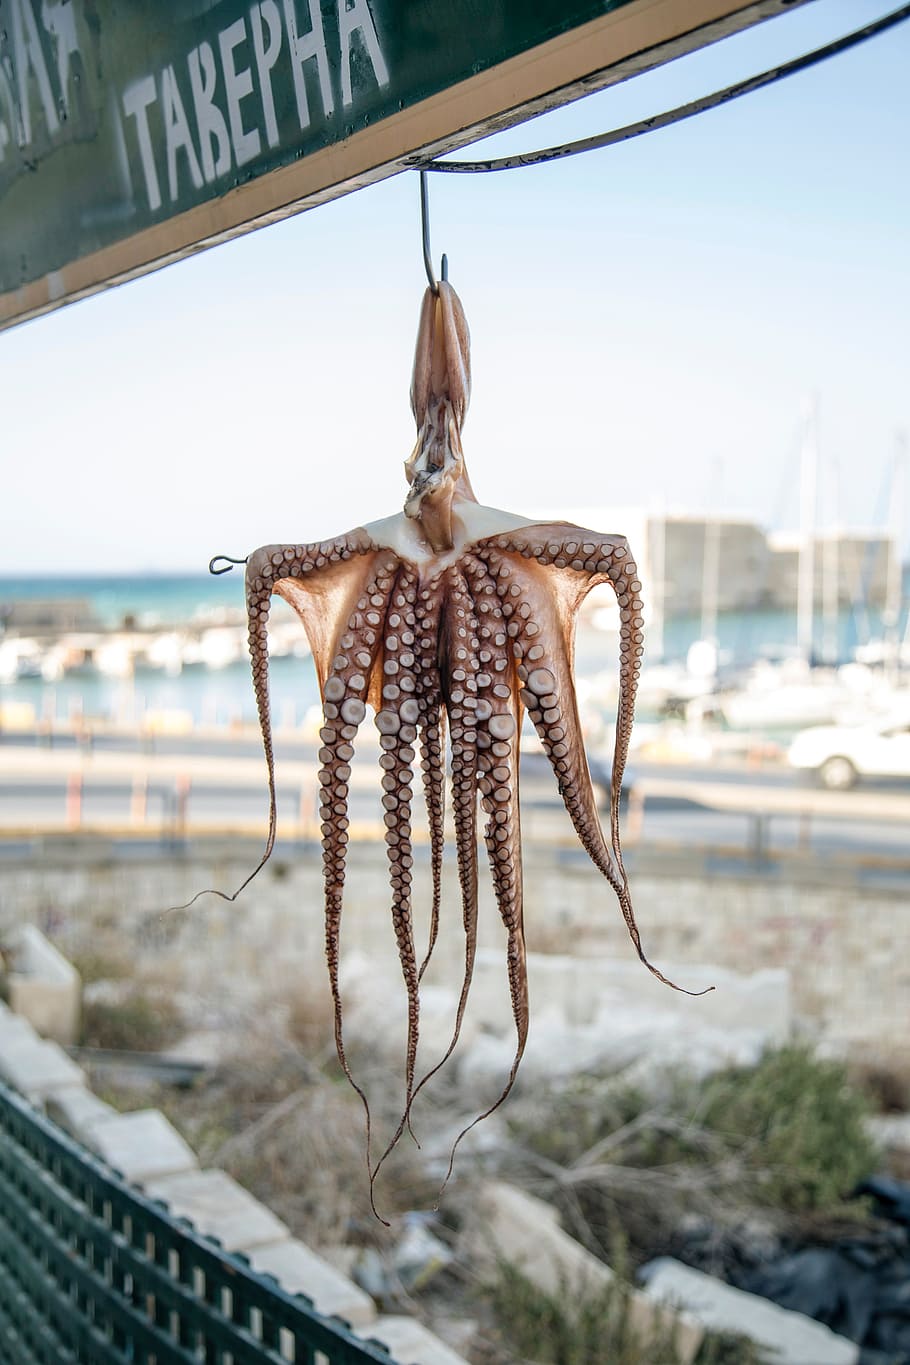 octopus, outdoor, seafood, squid, animal, glass - material, sea, focus on foreground, transparent, water